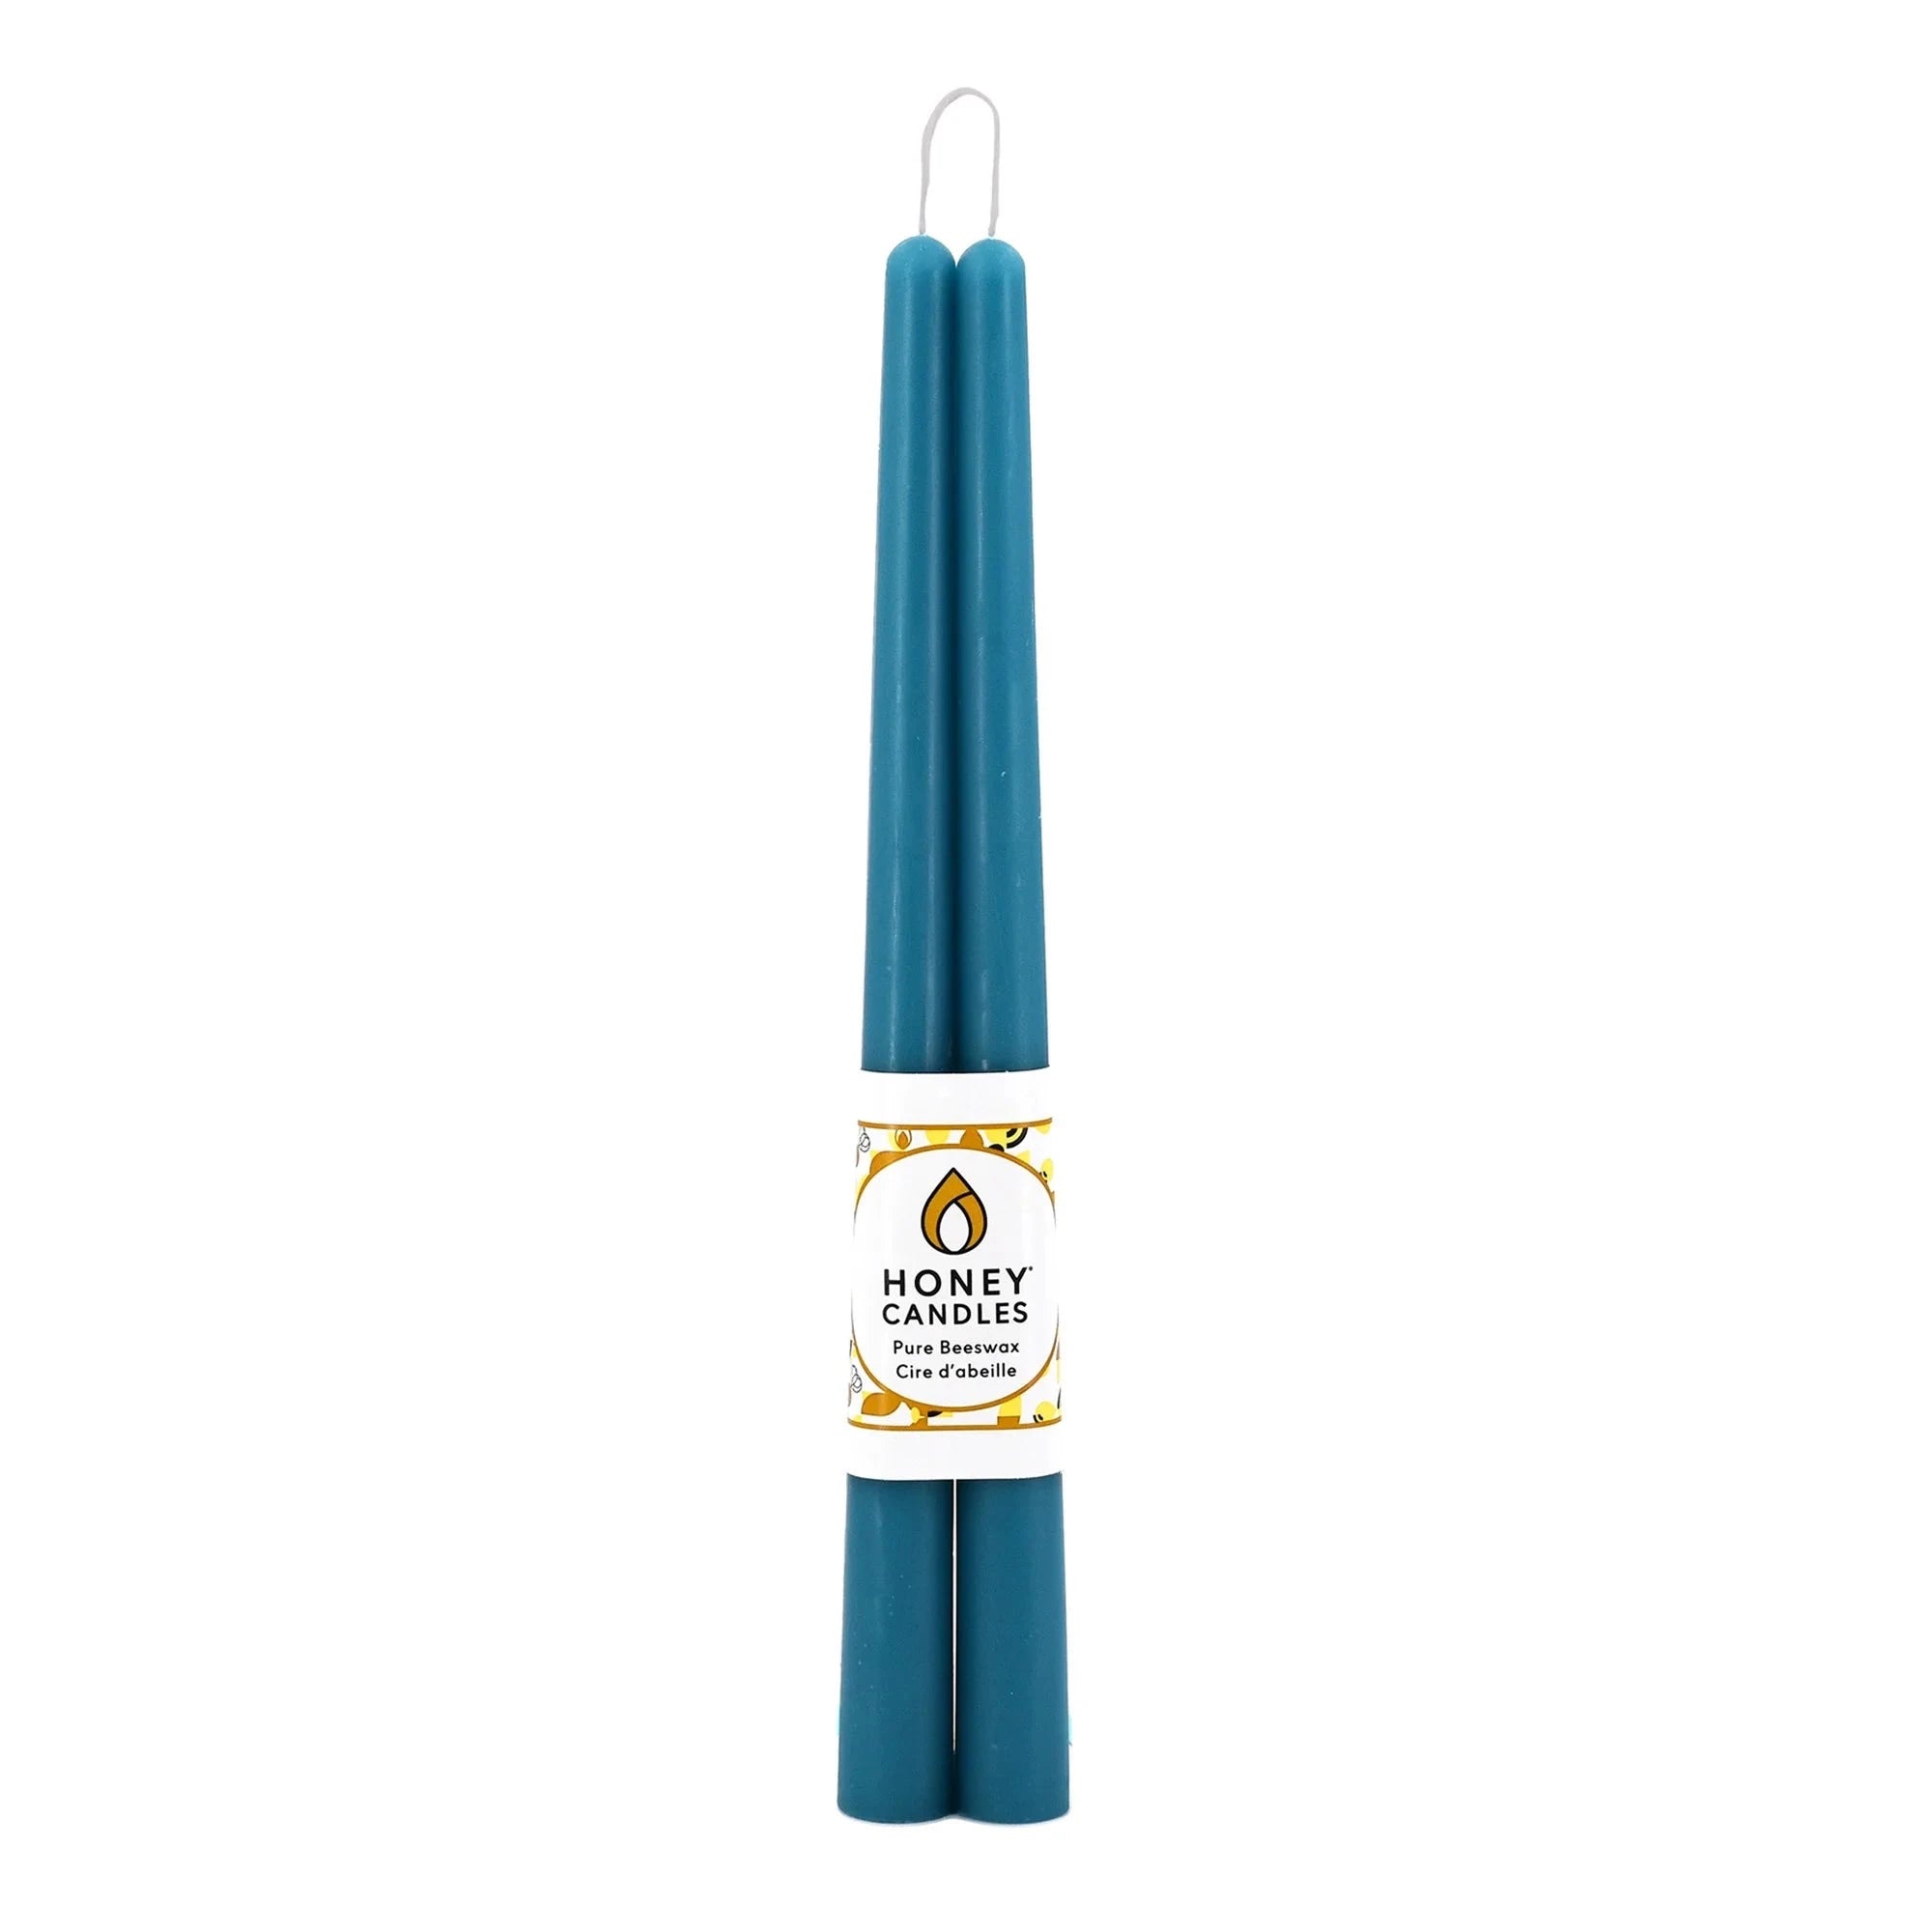 12" Taper Beeswax Candles - Glacier Teal